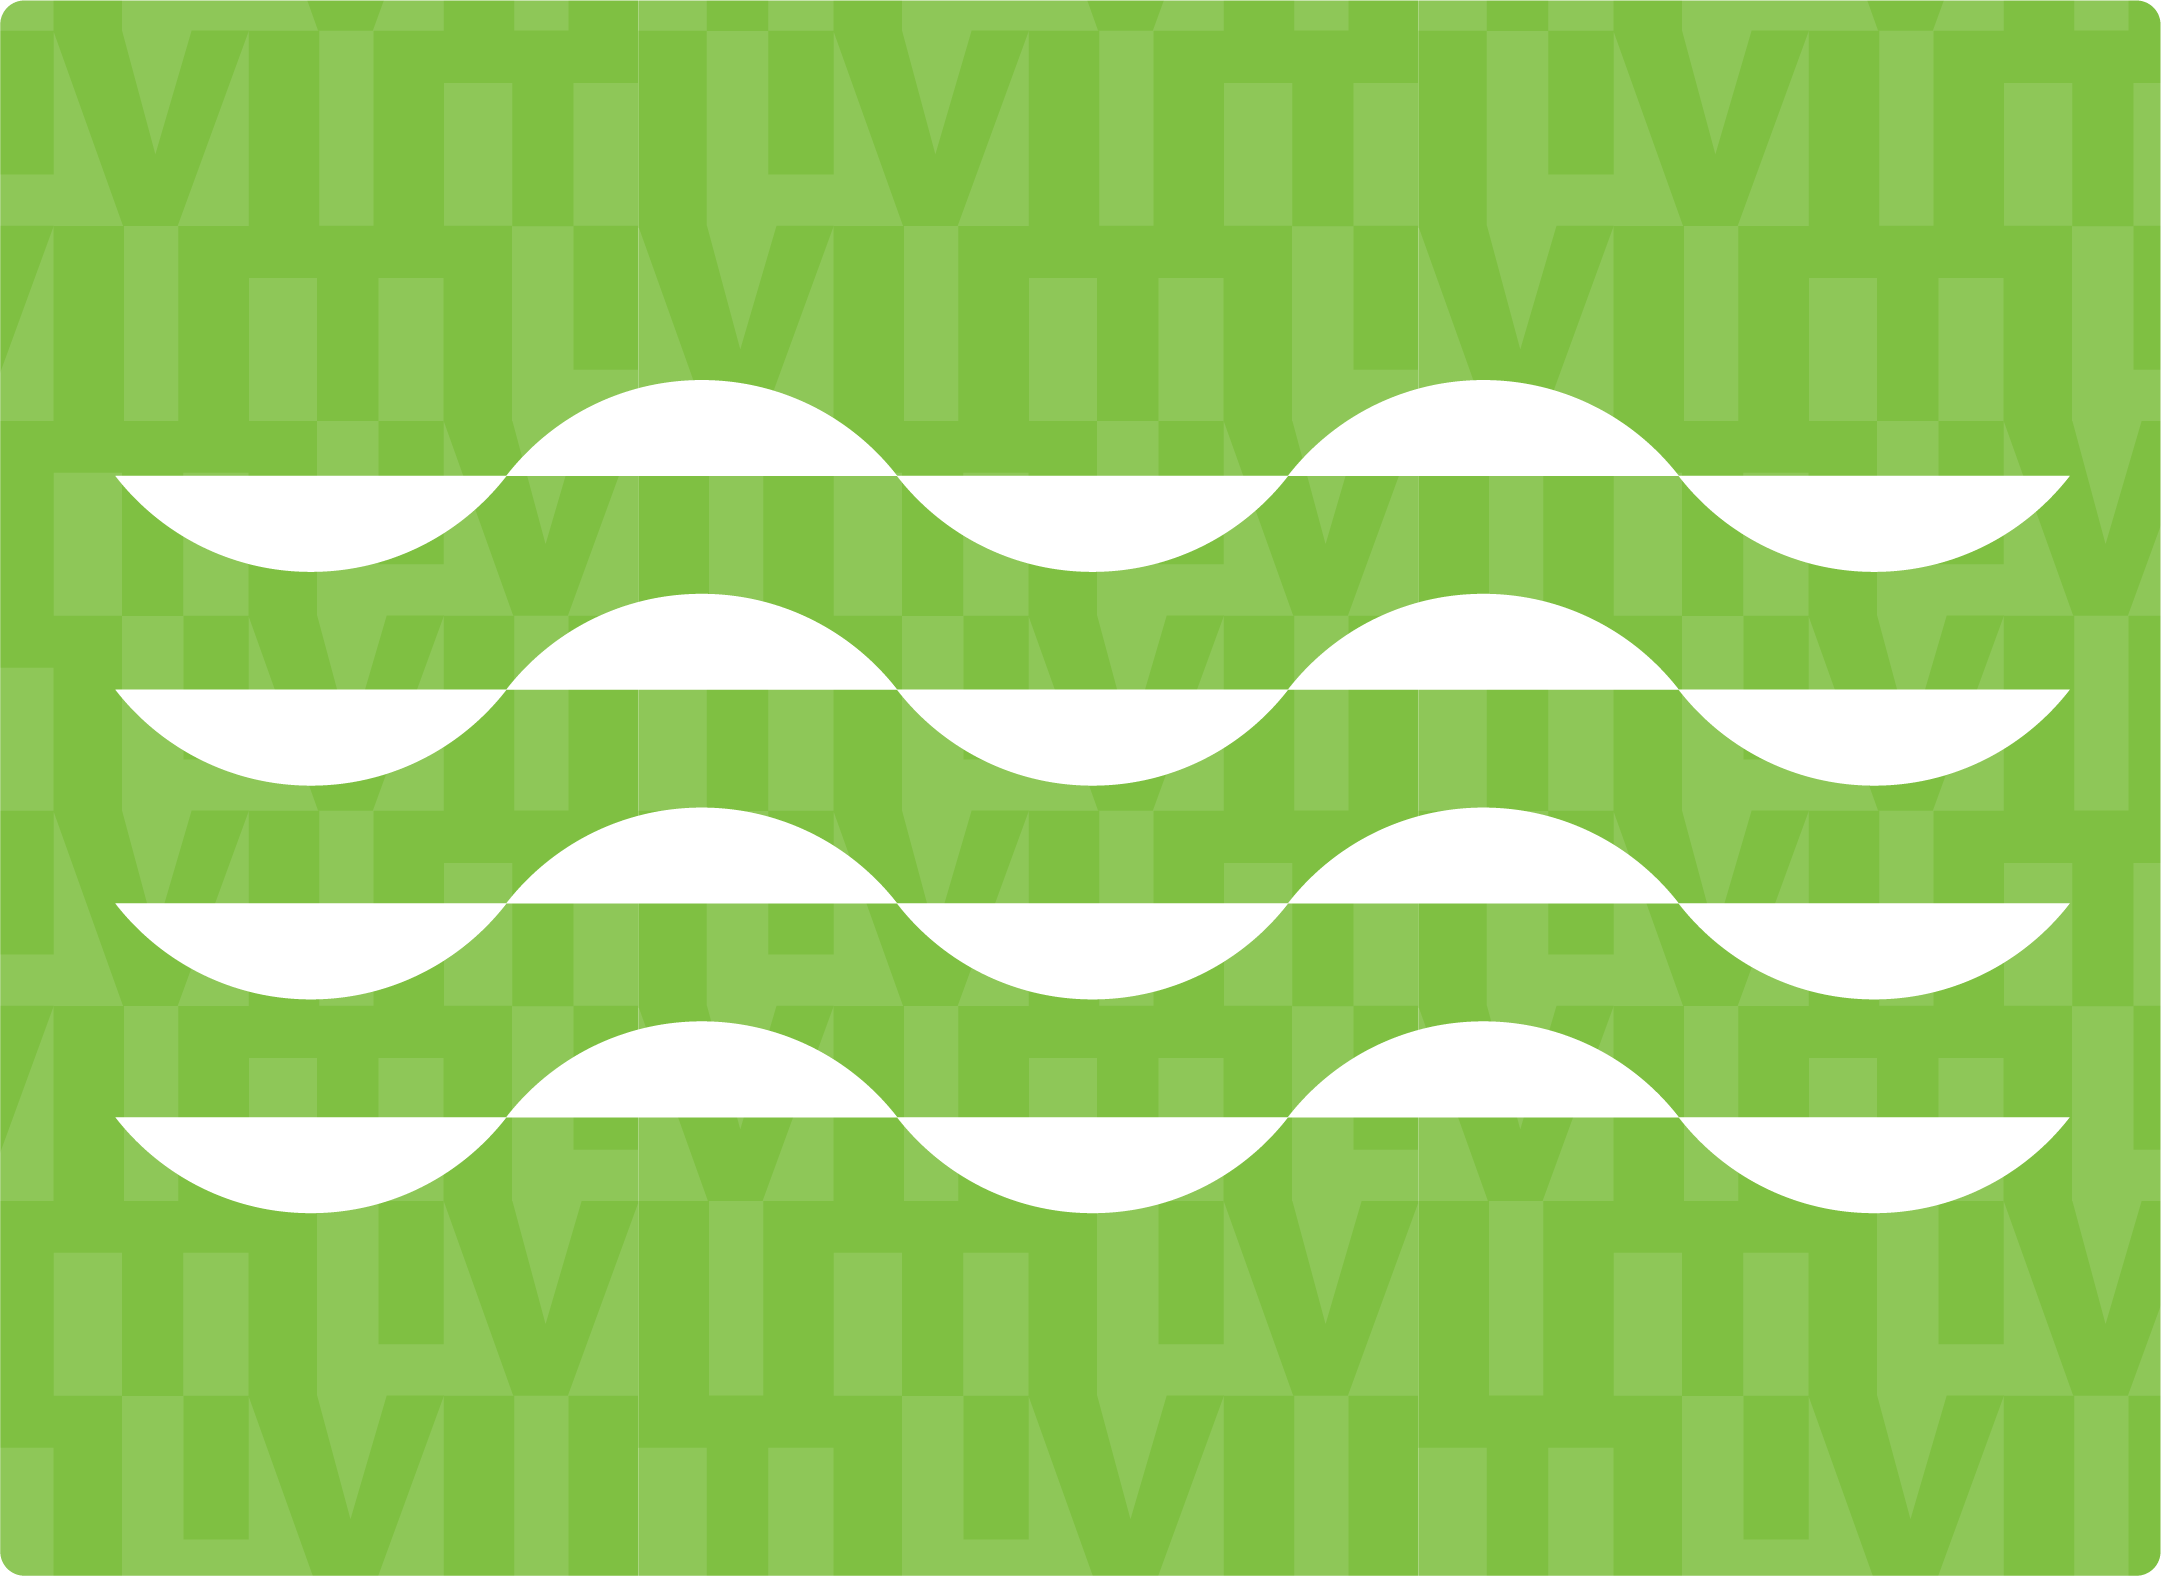 Green Waves Graphic